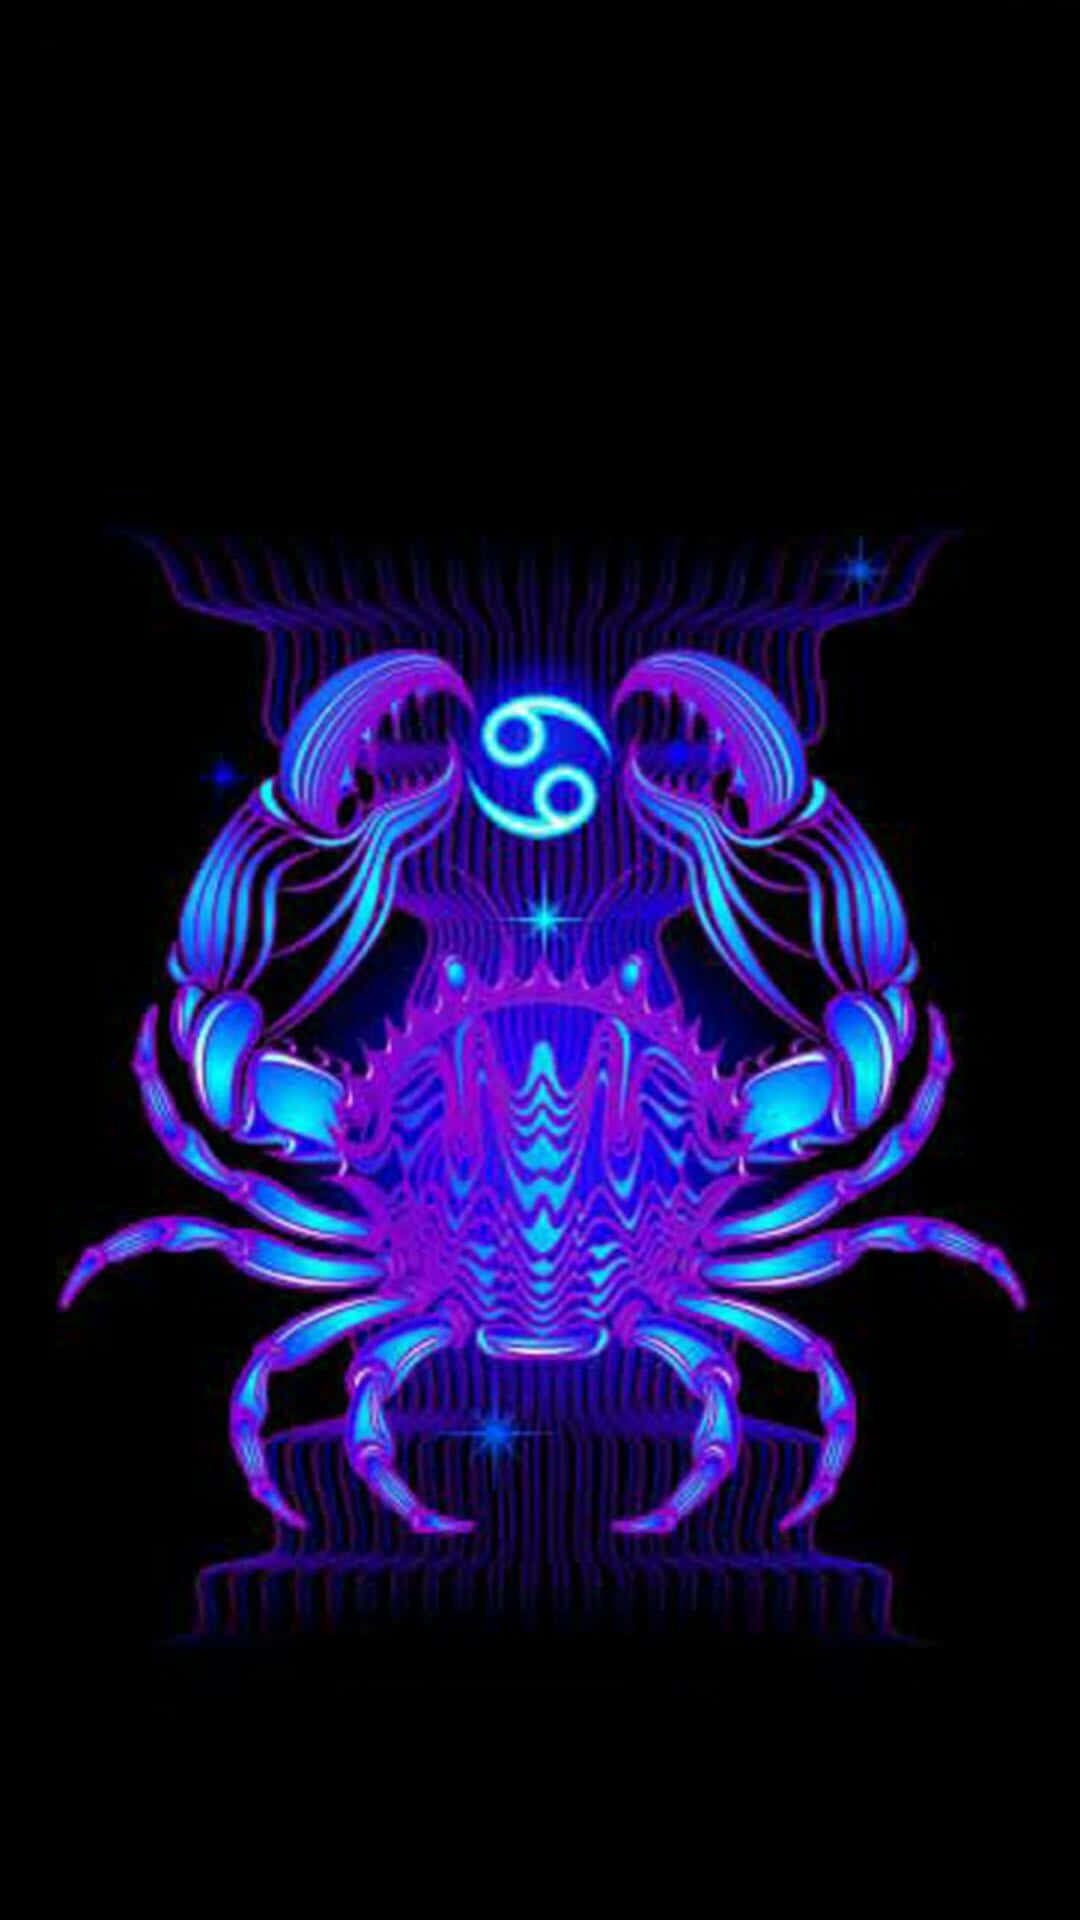 A Blue And Purple Crab On A Black Background Wallpaper